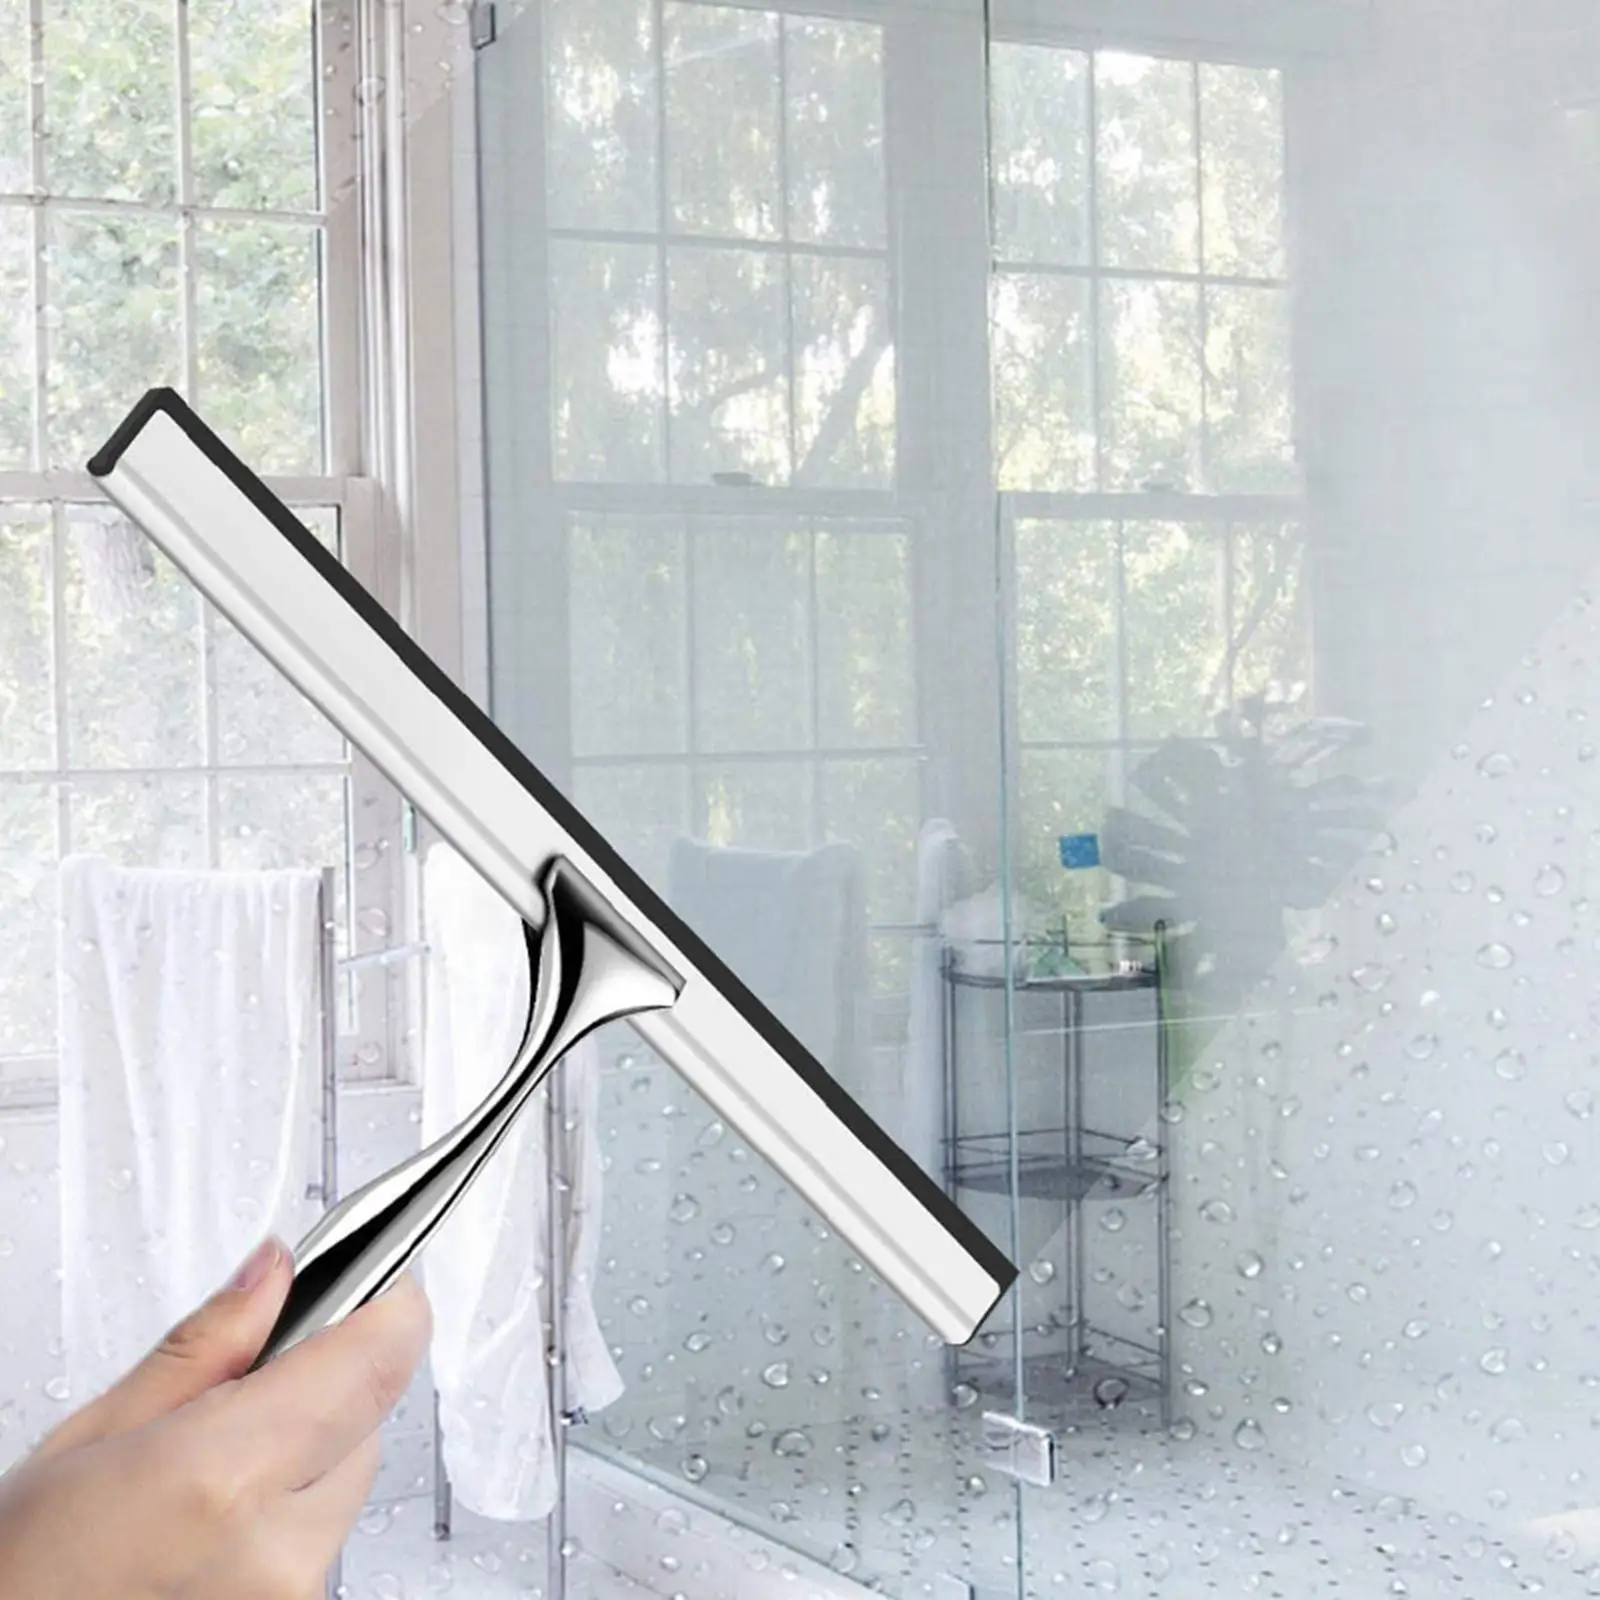 Multipurpose Shower Squeegee Soap Foam Cleaner with Suction Hook Car Windshield for Tiled Surfaces Home Bathroom Shower Doors